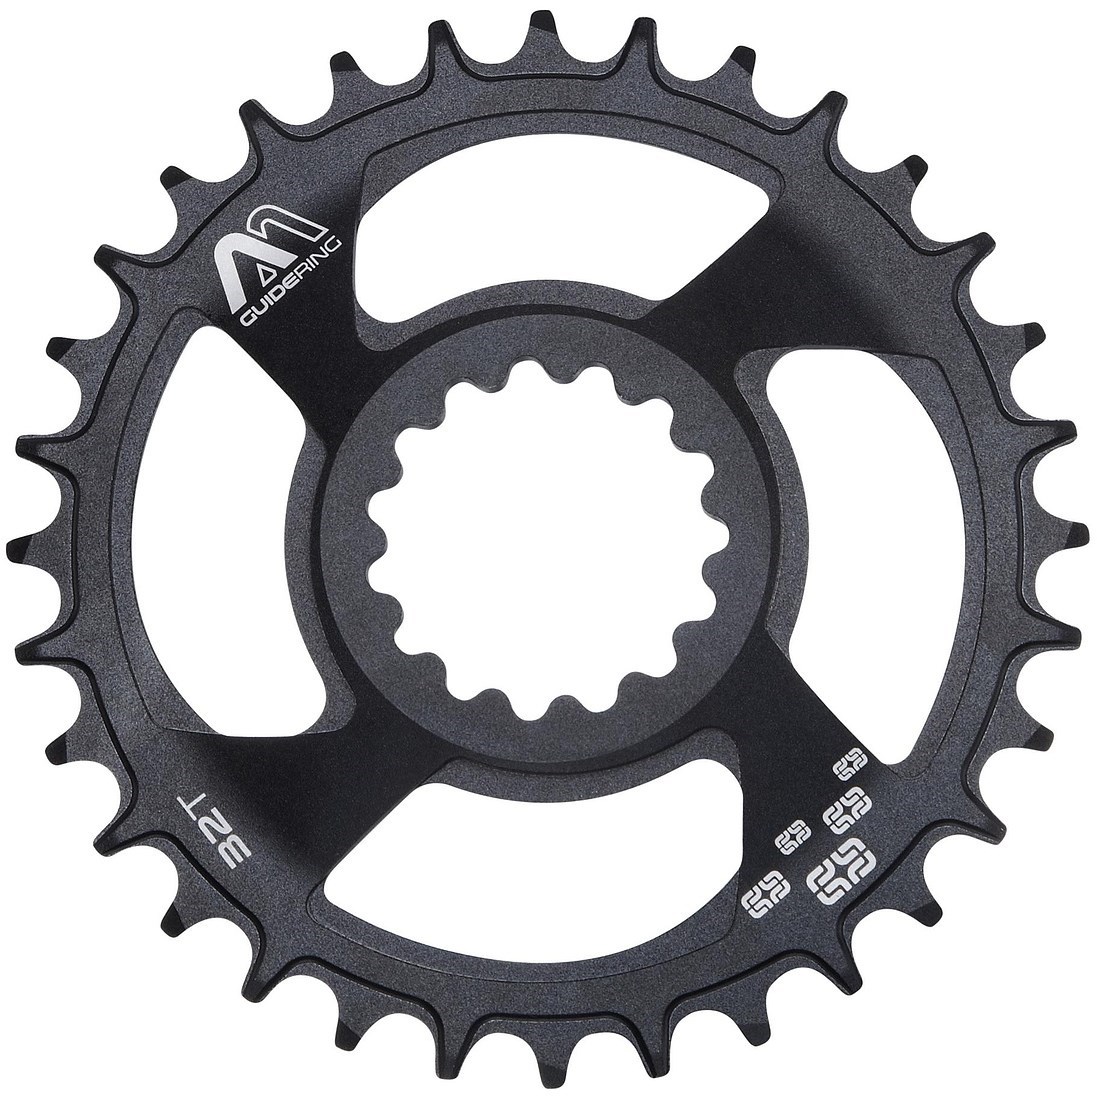 E-Thirteen Guidering M Direct Mount Chainring product image